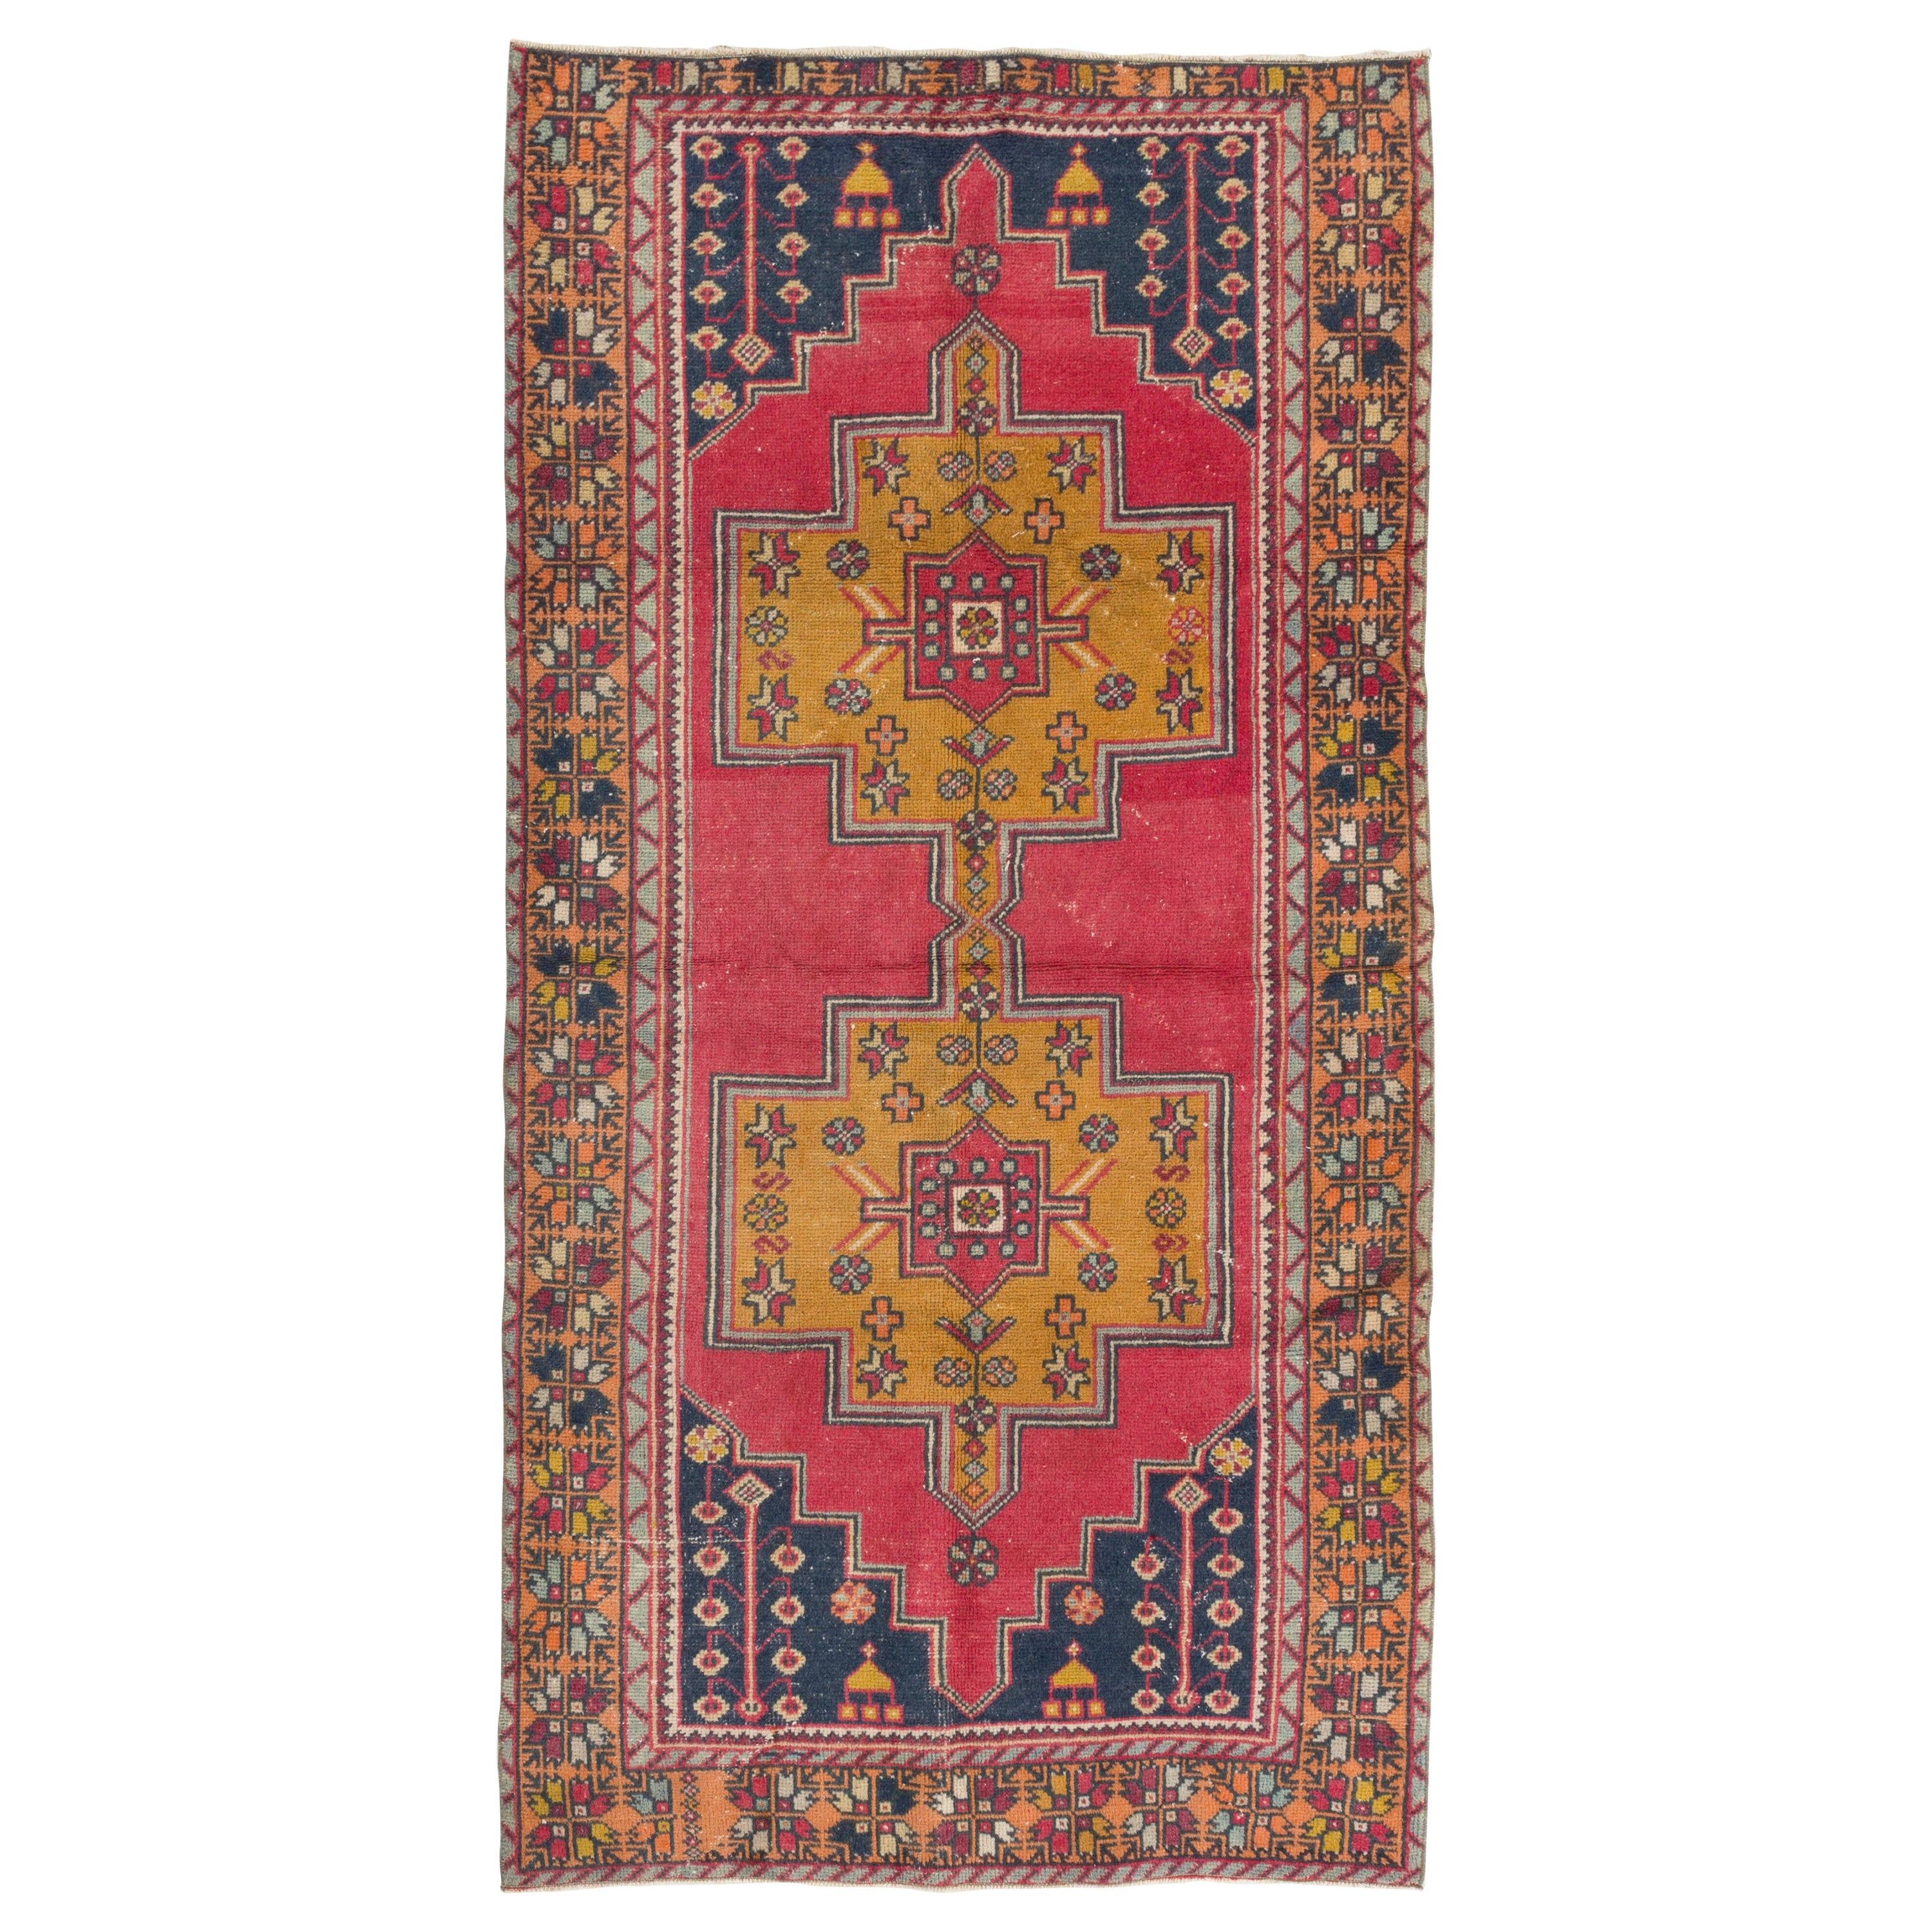 4.2x8.2 Ft Vintage Hand Knotted Turkish Wool Rug, Red, Dark Blue & Yellow Colors